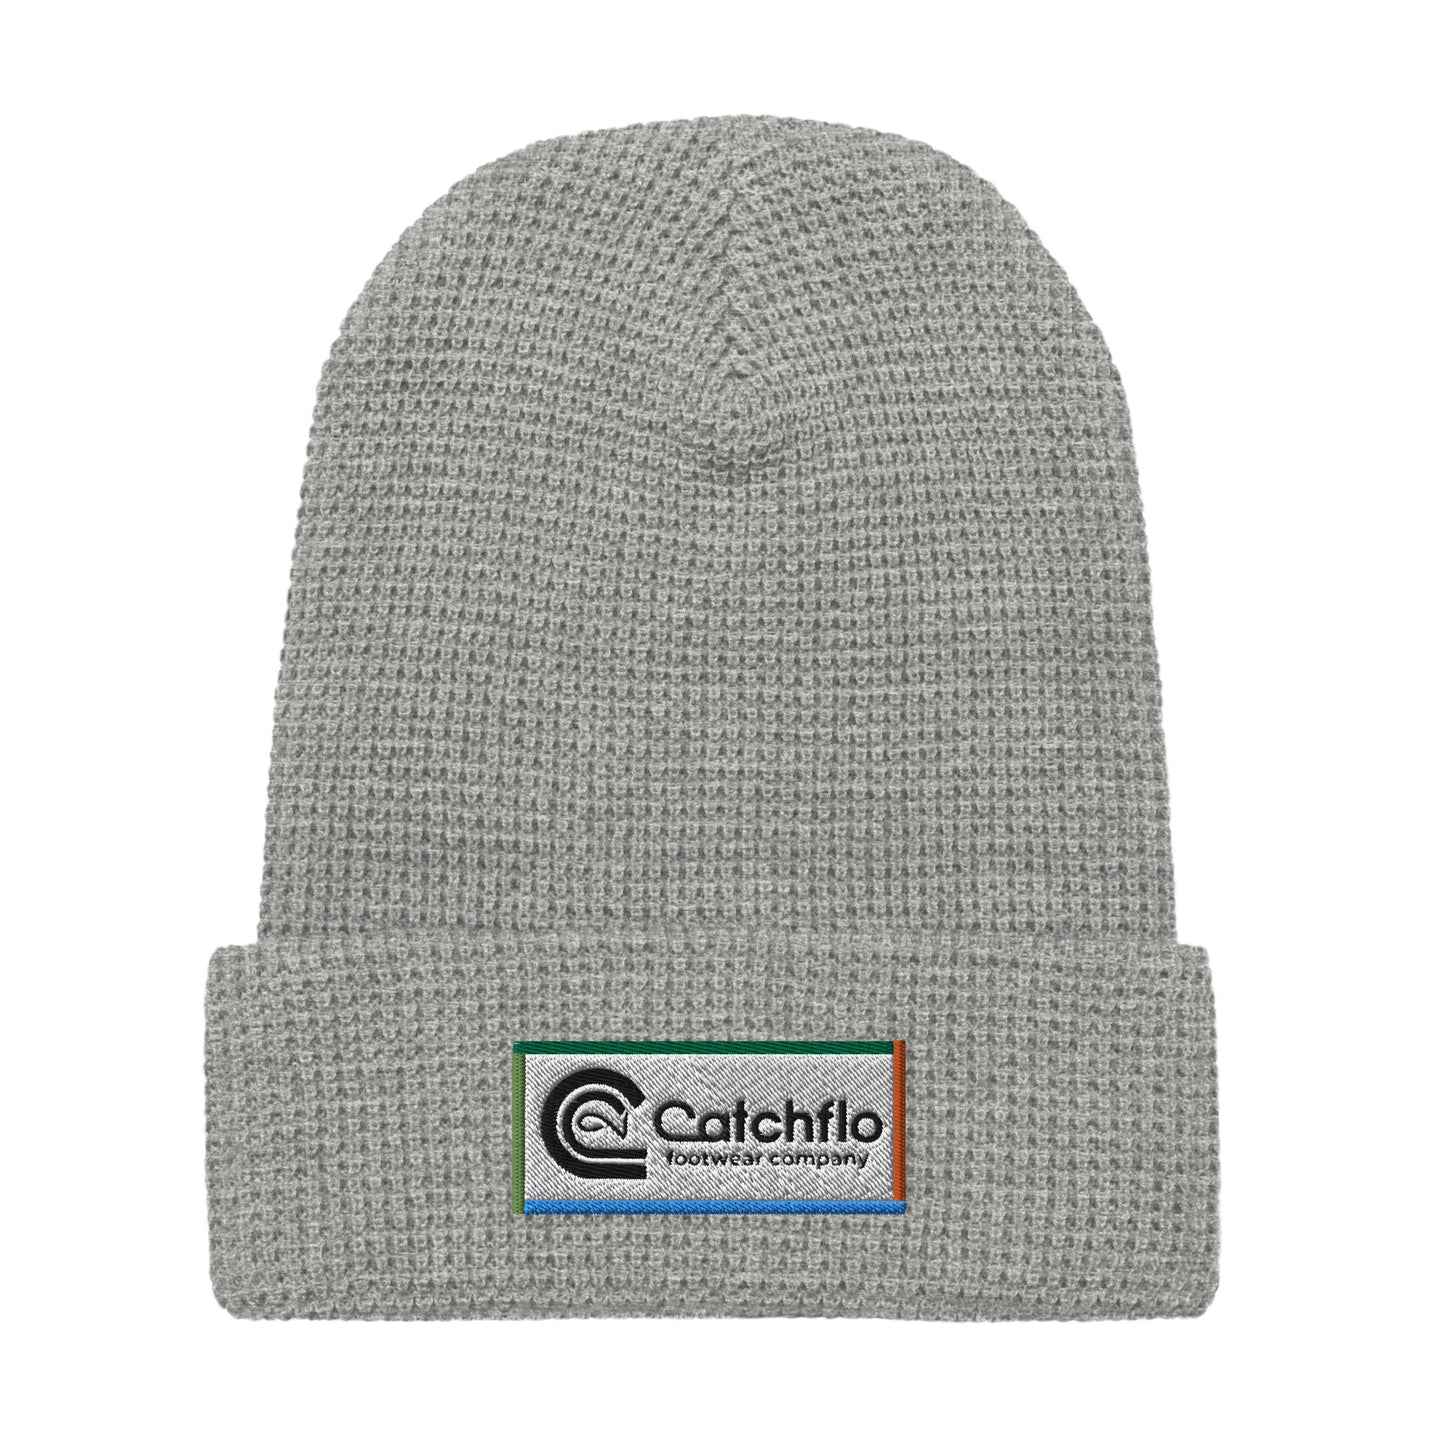 Catchflo Footwear Company Waffle Beanie (8 color choices)